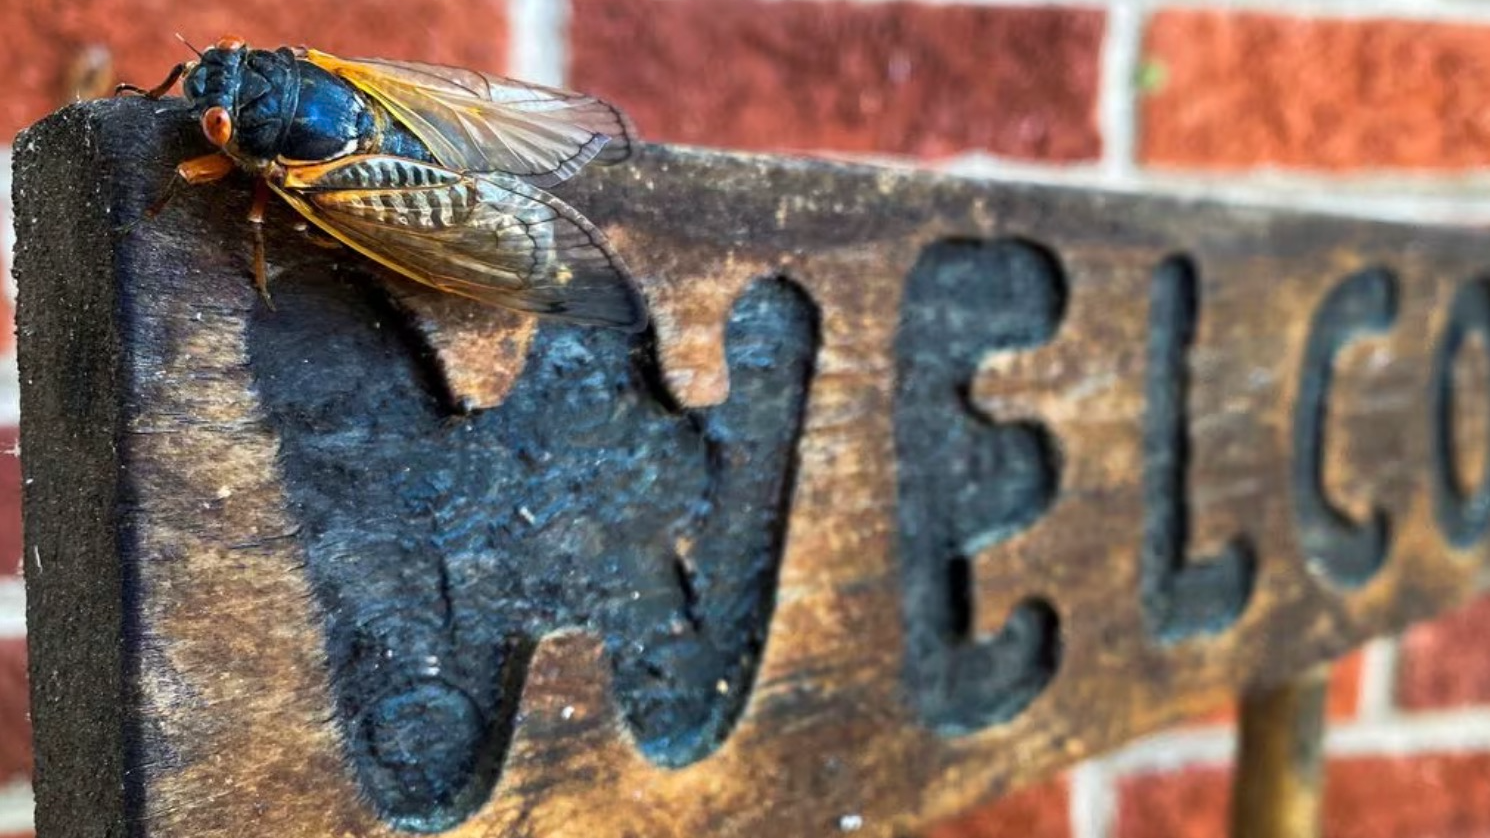 A cicada is seen perched on a wooden sign on the porch of a house in Arlington, Virginia, U.S., May 20, 2021. /CFP